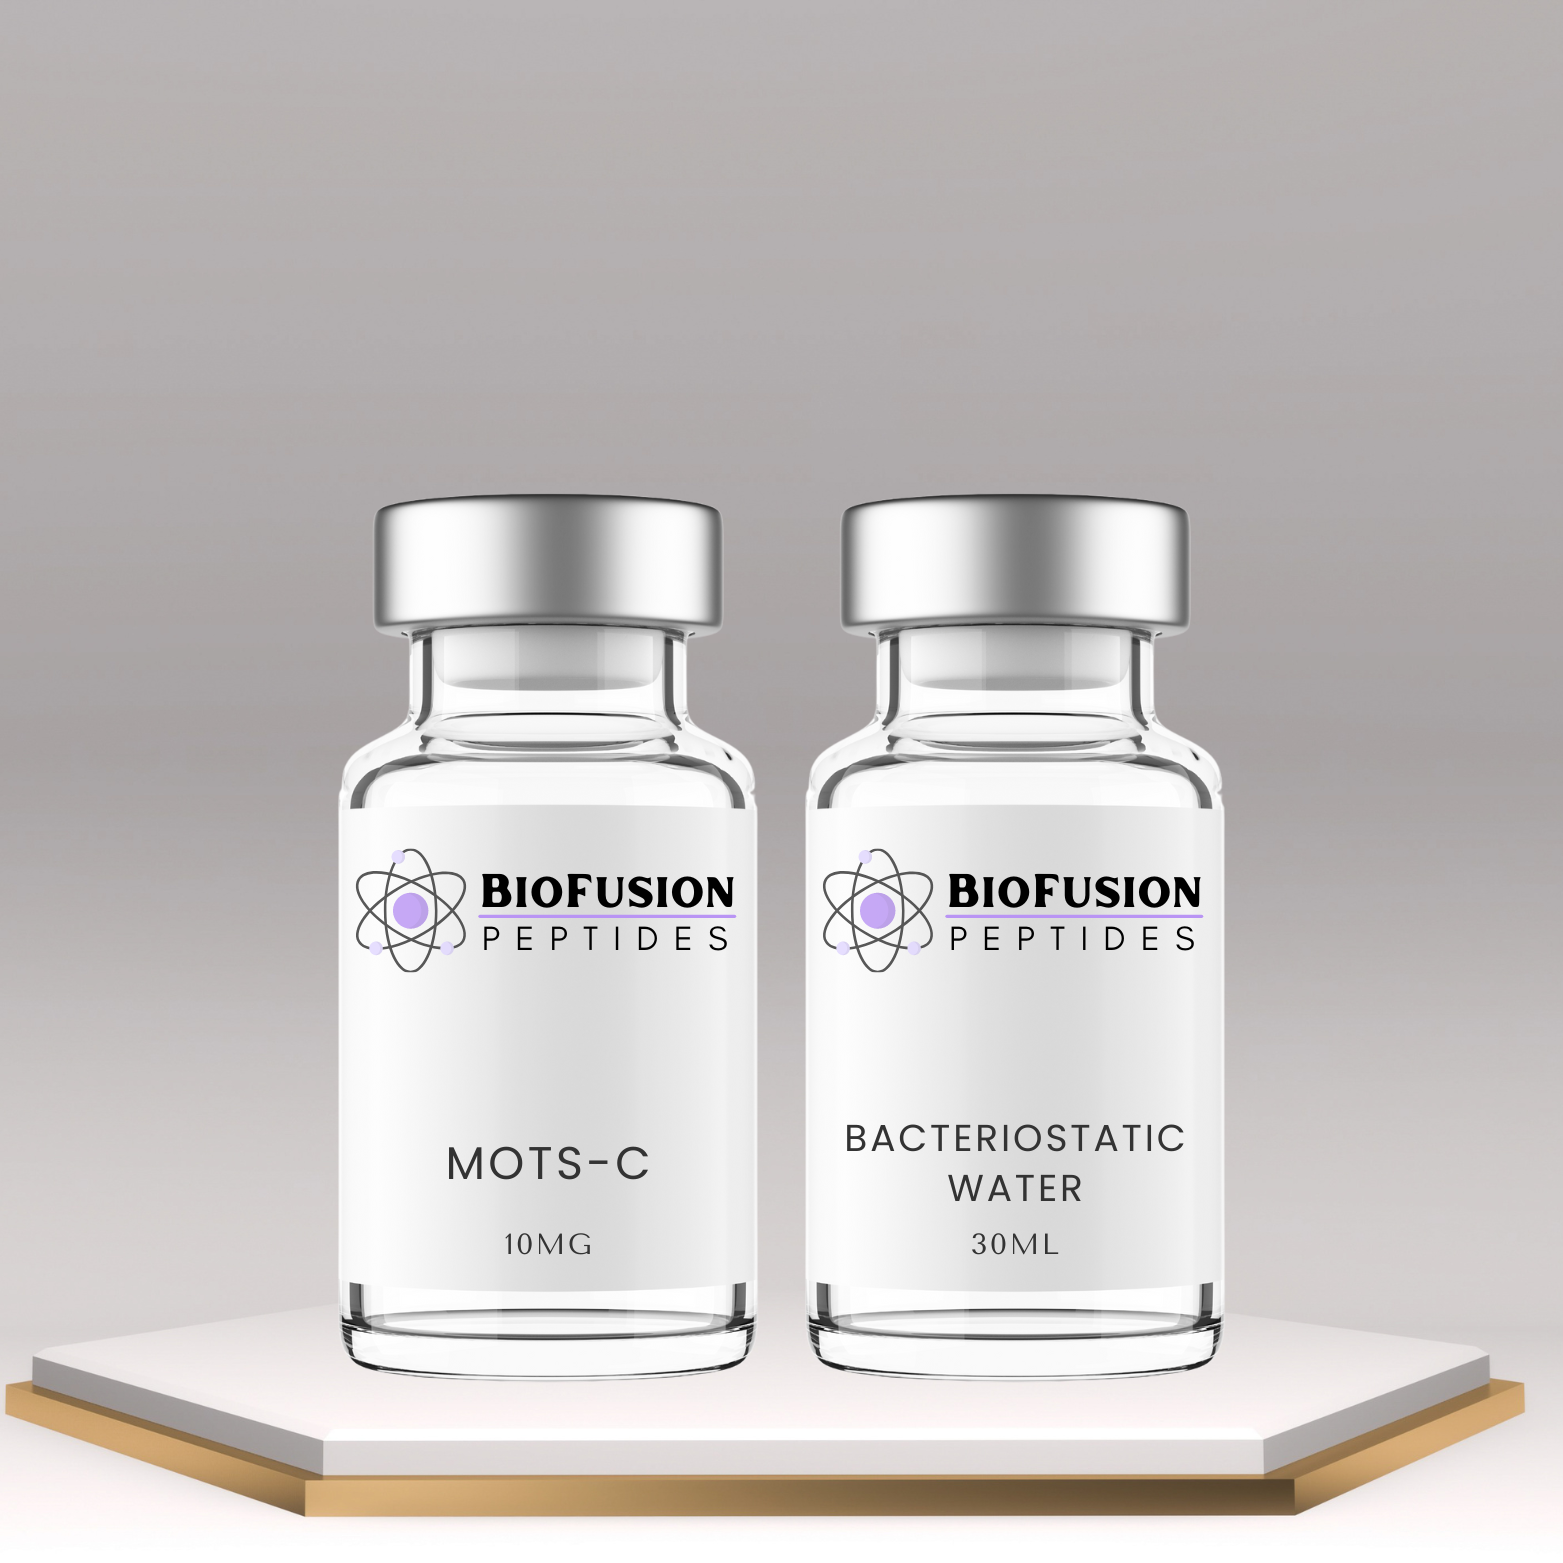 BioFusion Peptides MOTS-C kit with bacteriostatic water